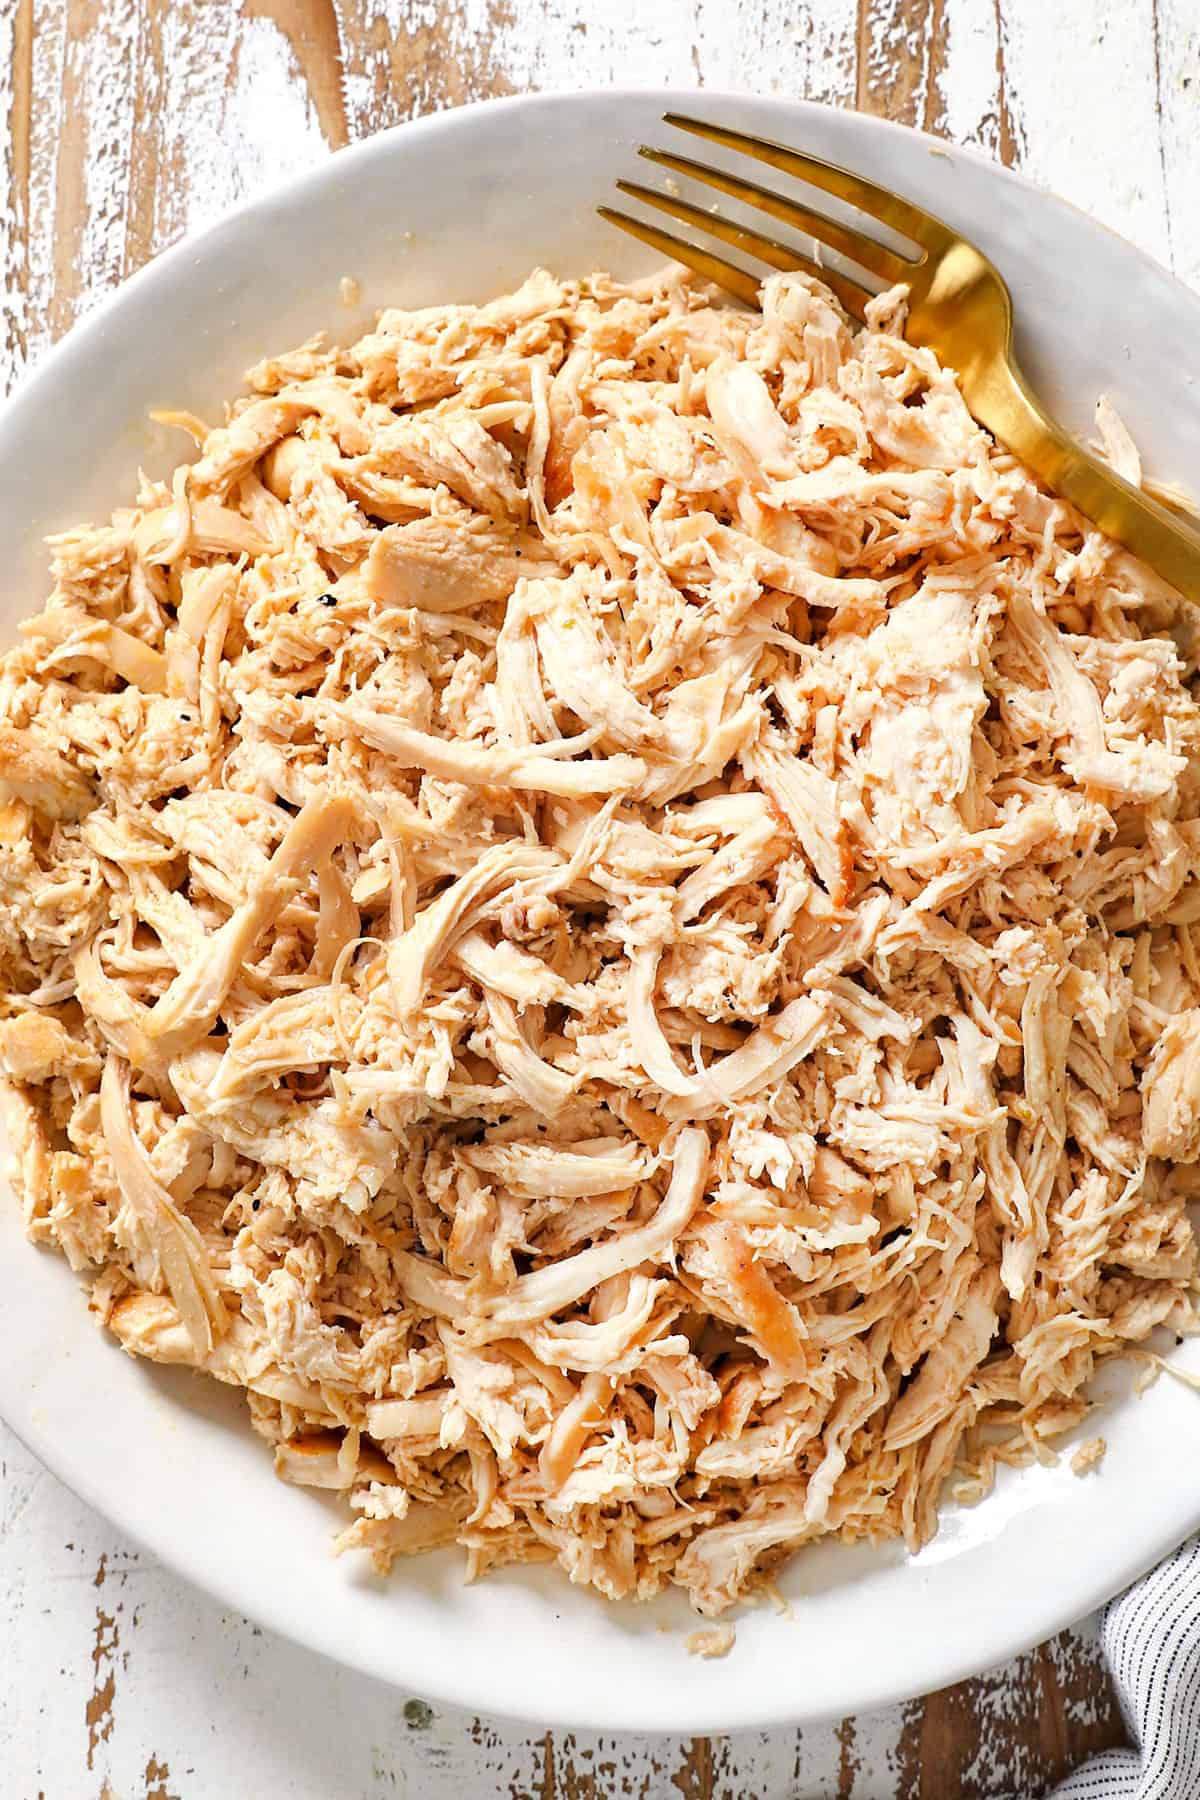 top view of shredded chicken recipe showing how juicy it is